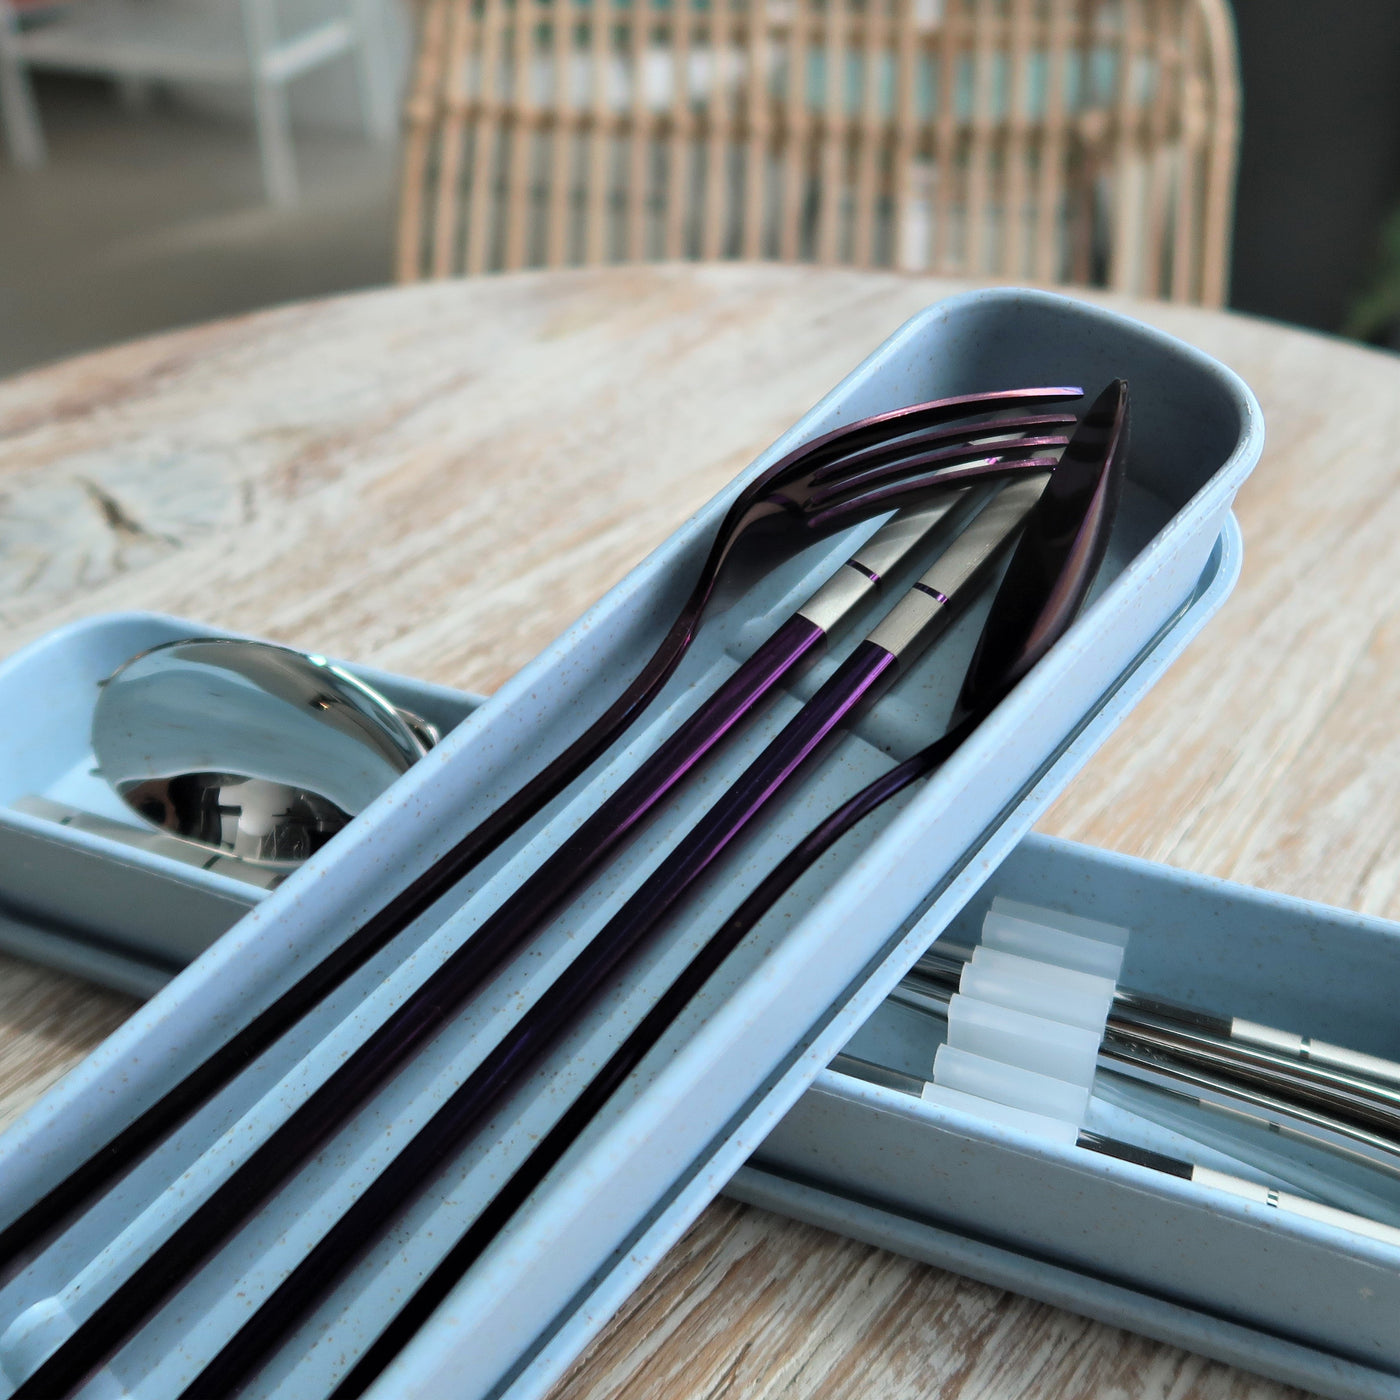 Stainless Steel Cutlery Set (Adult)